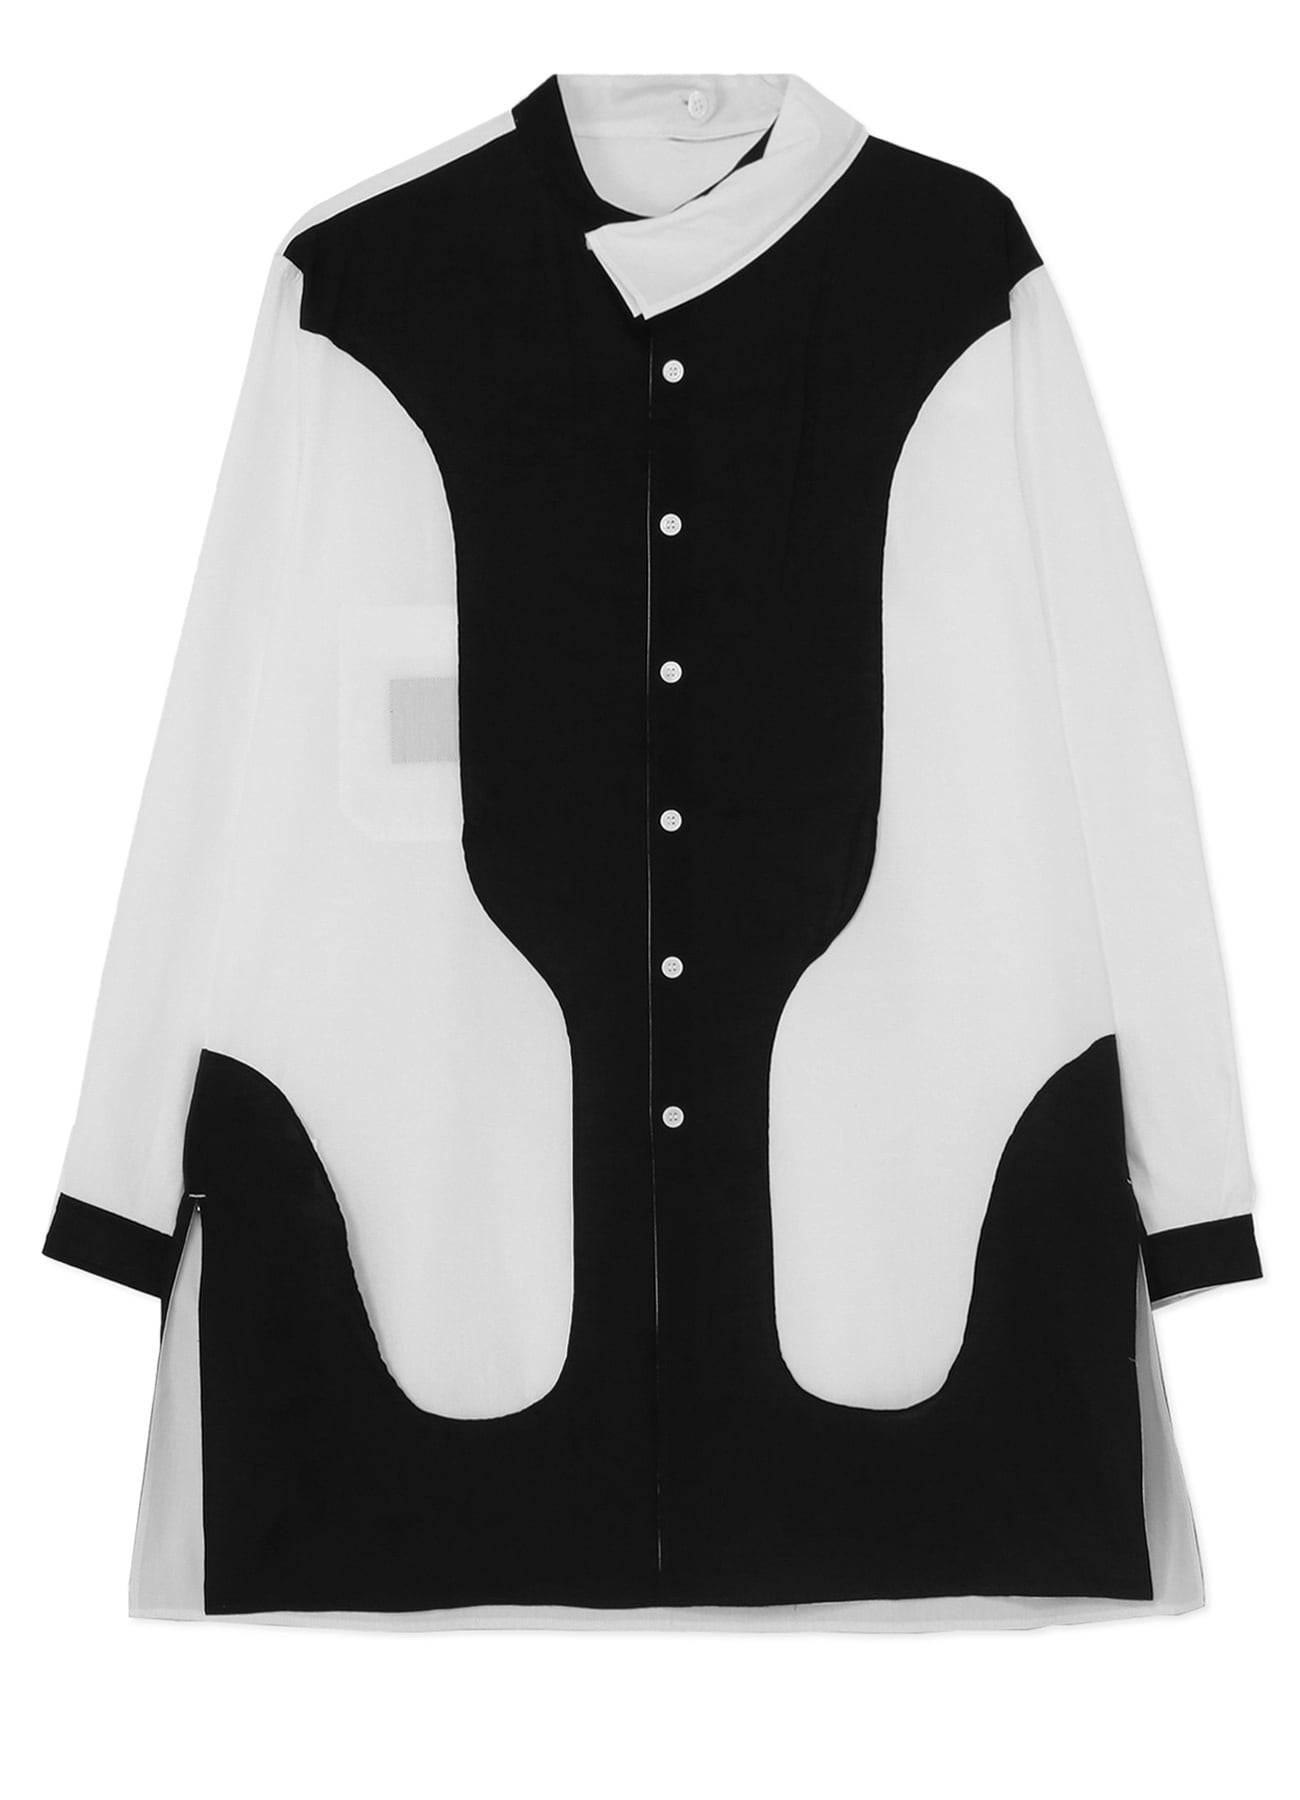 BLACK AND WHITE SHIRT WITH HALF DOUBLE COLLAR